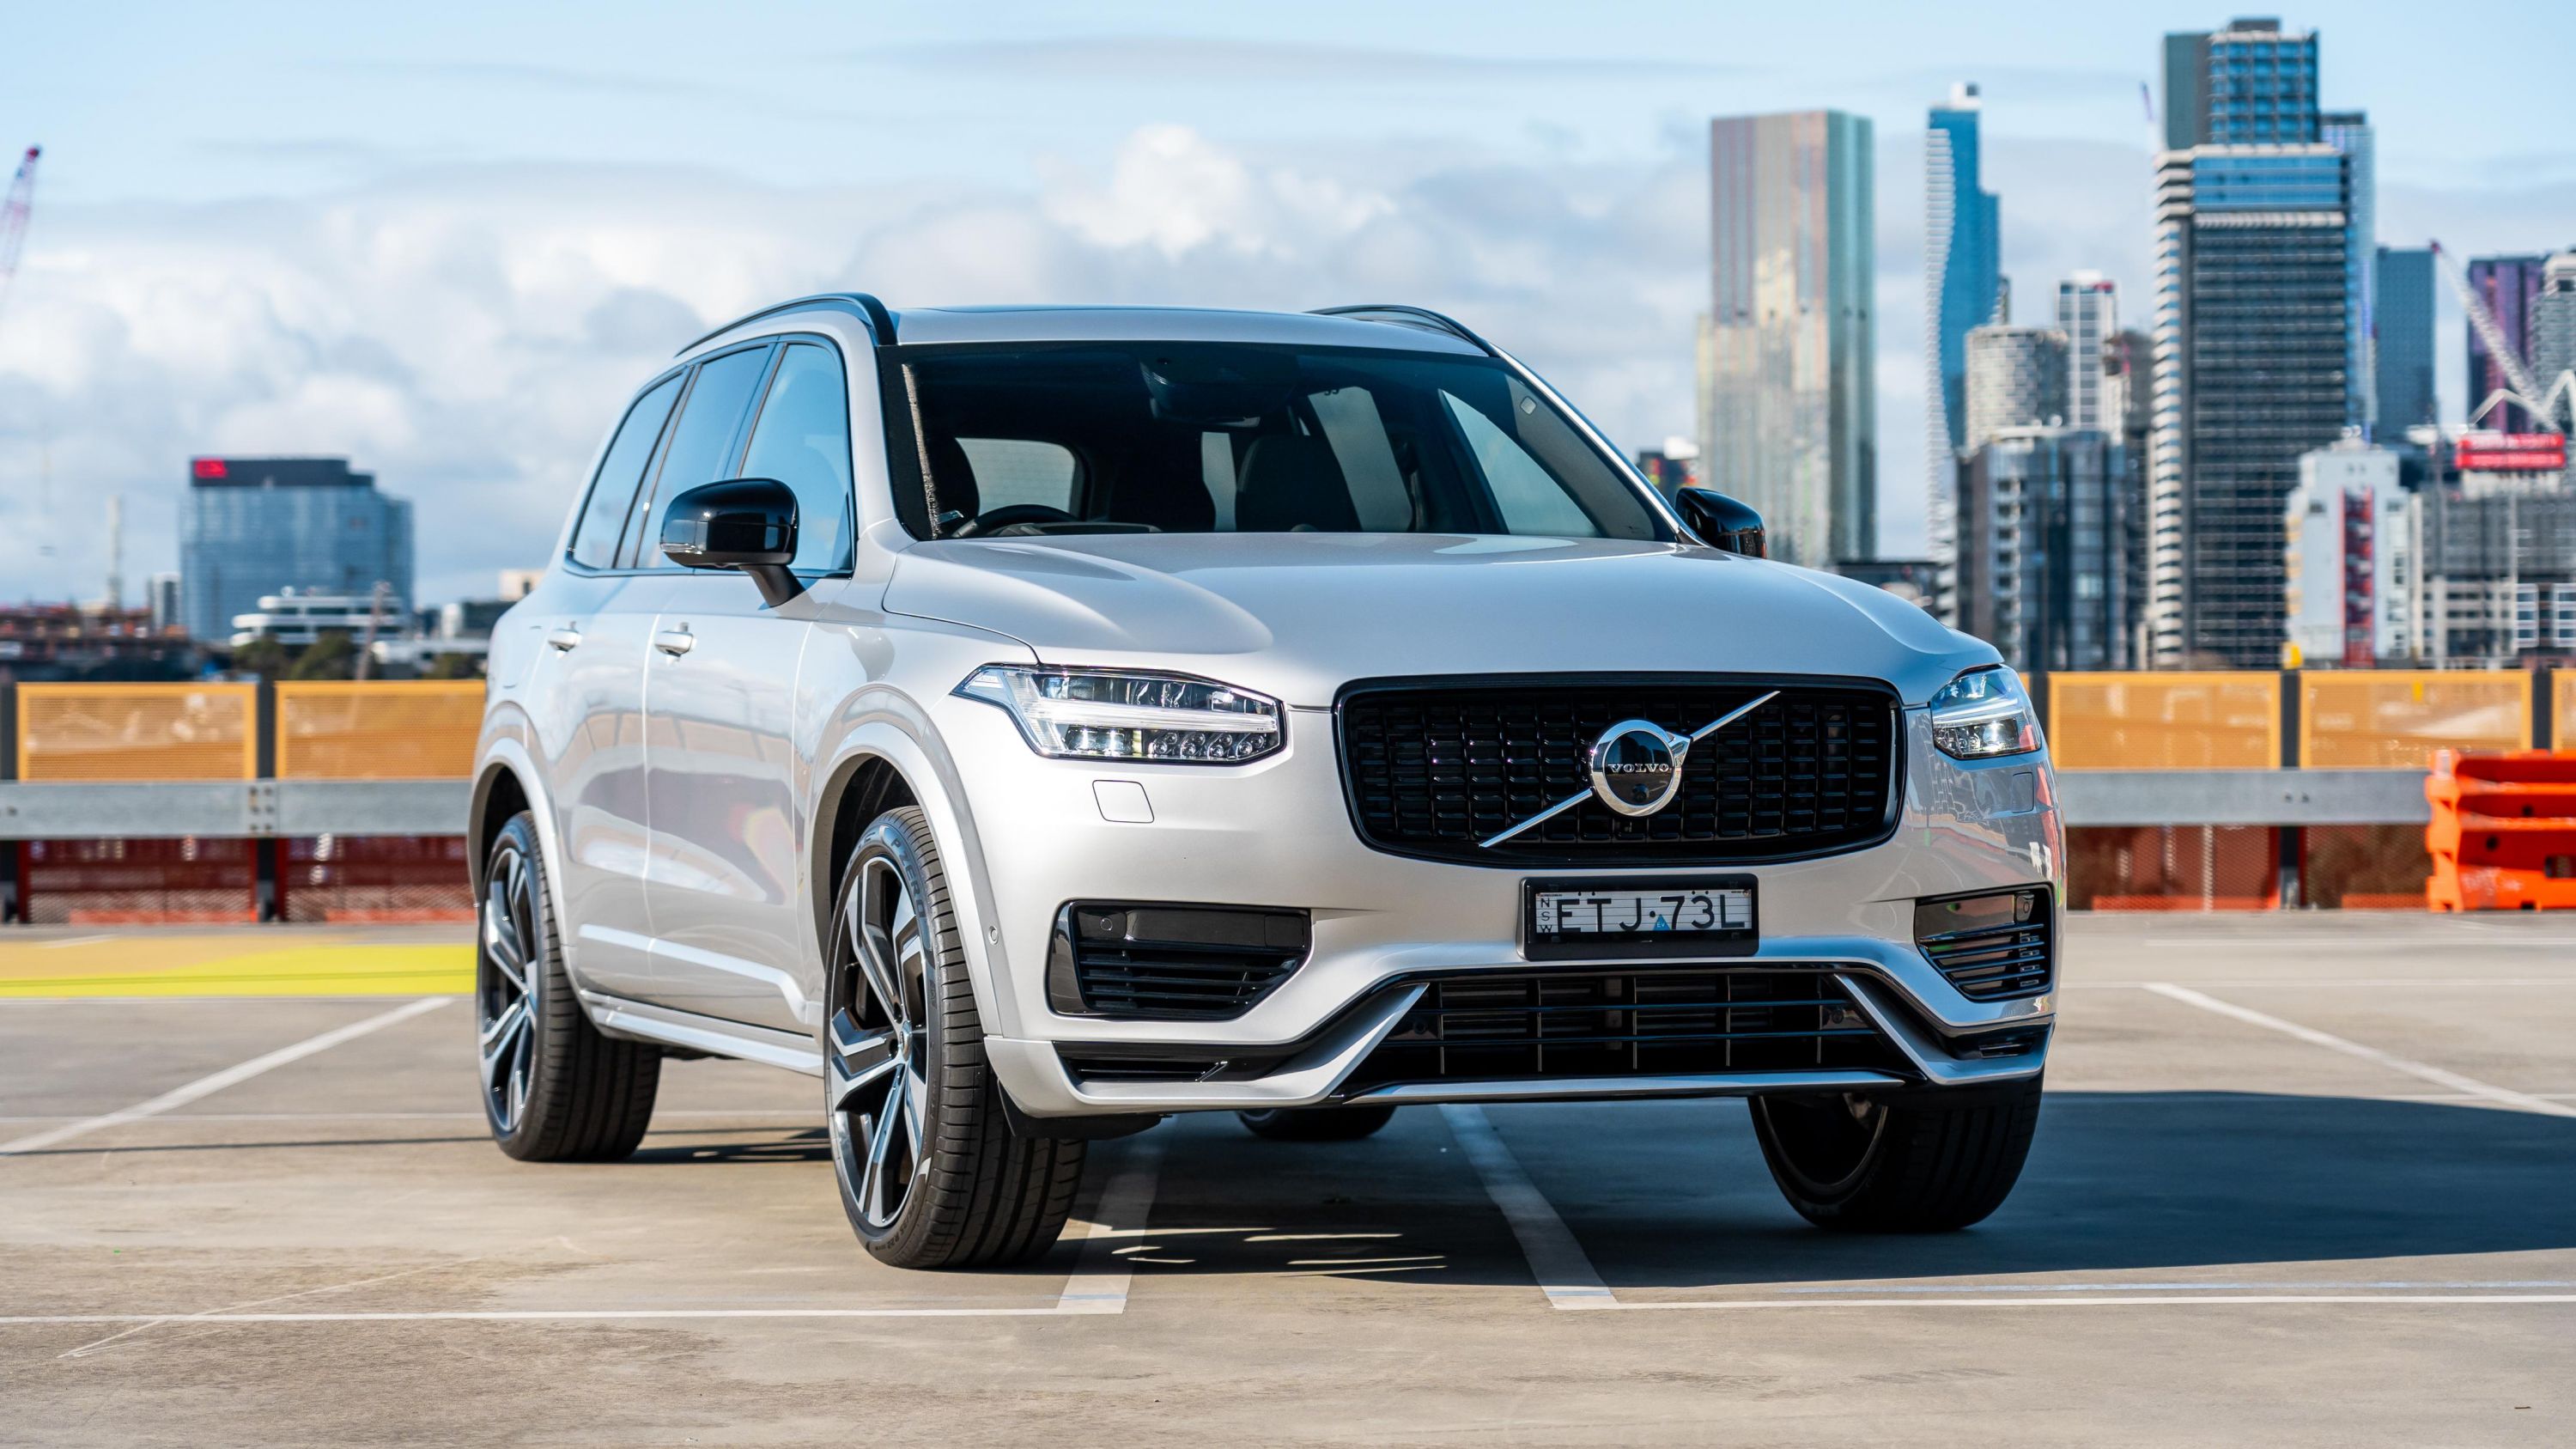 Think your car is baby-friendly? This Volvo XC90 has it beat